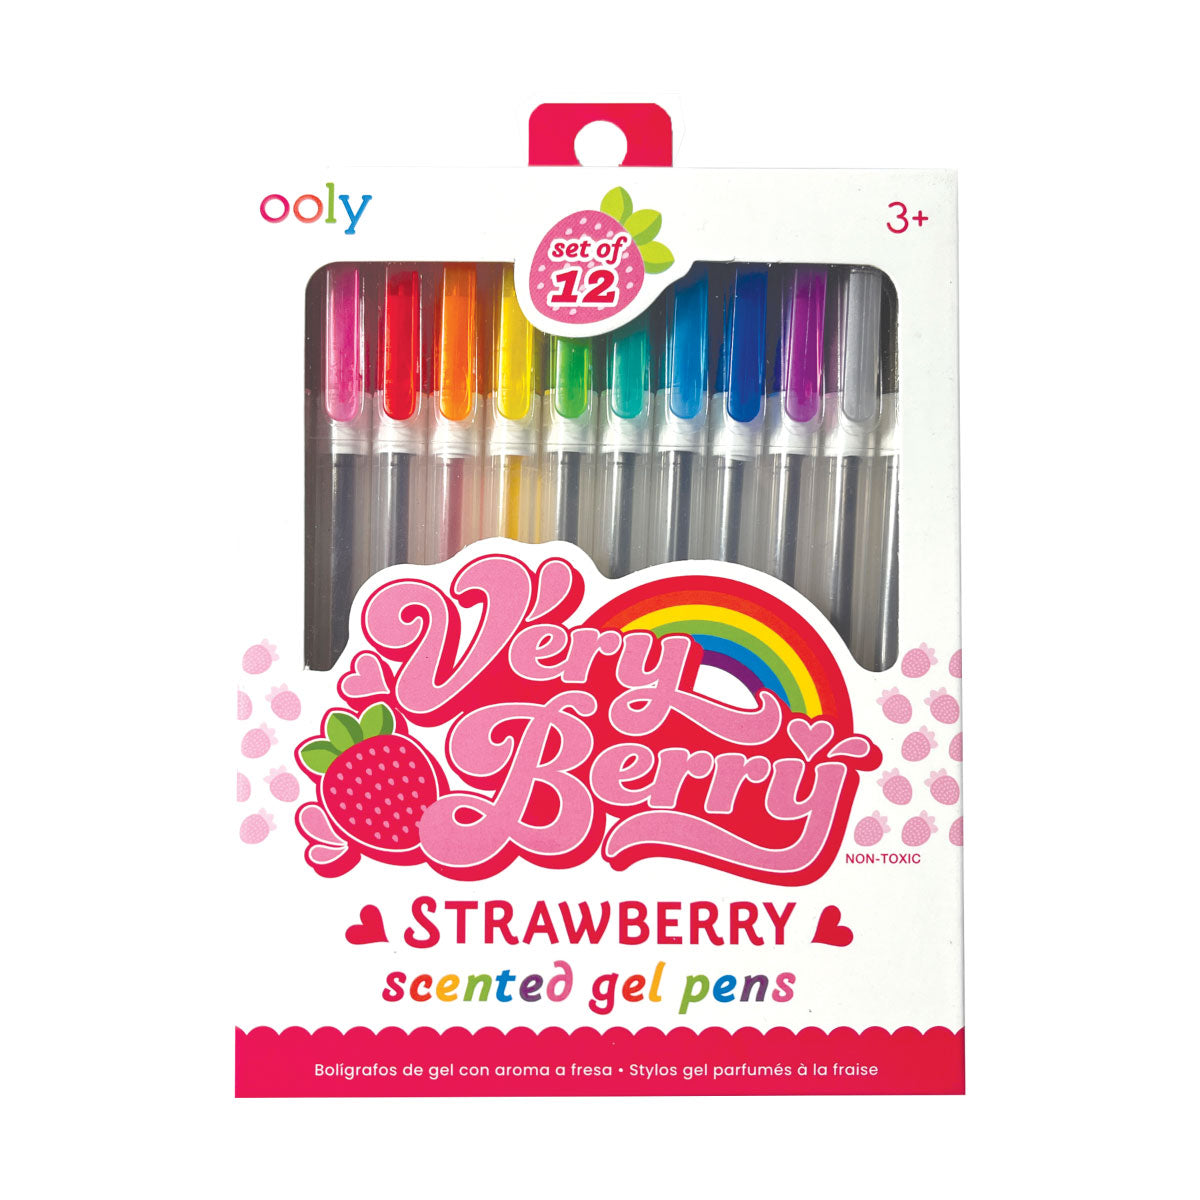 Very Berry Strawberry Scented Gel Pens from Ooly